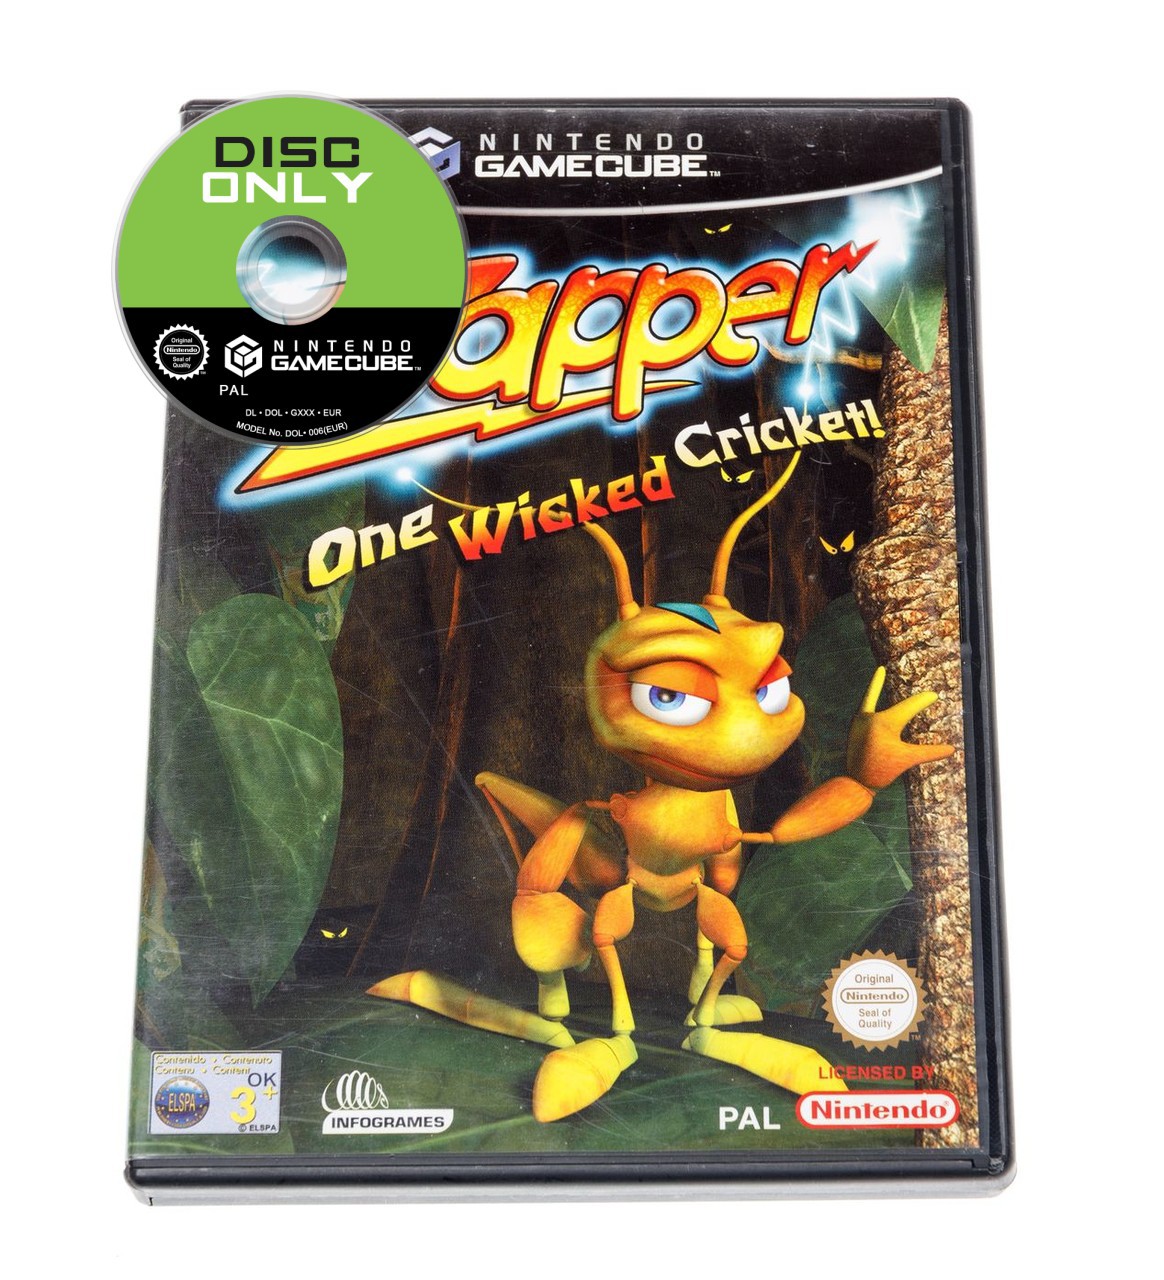 Zapper: One Wicked Cricket! - Disc Only Kopen | Gamecube Games